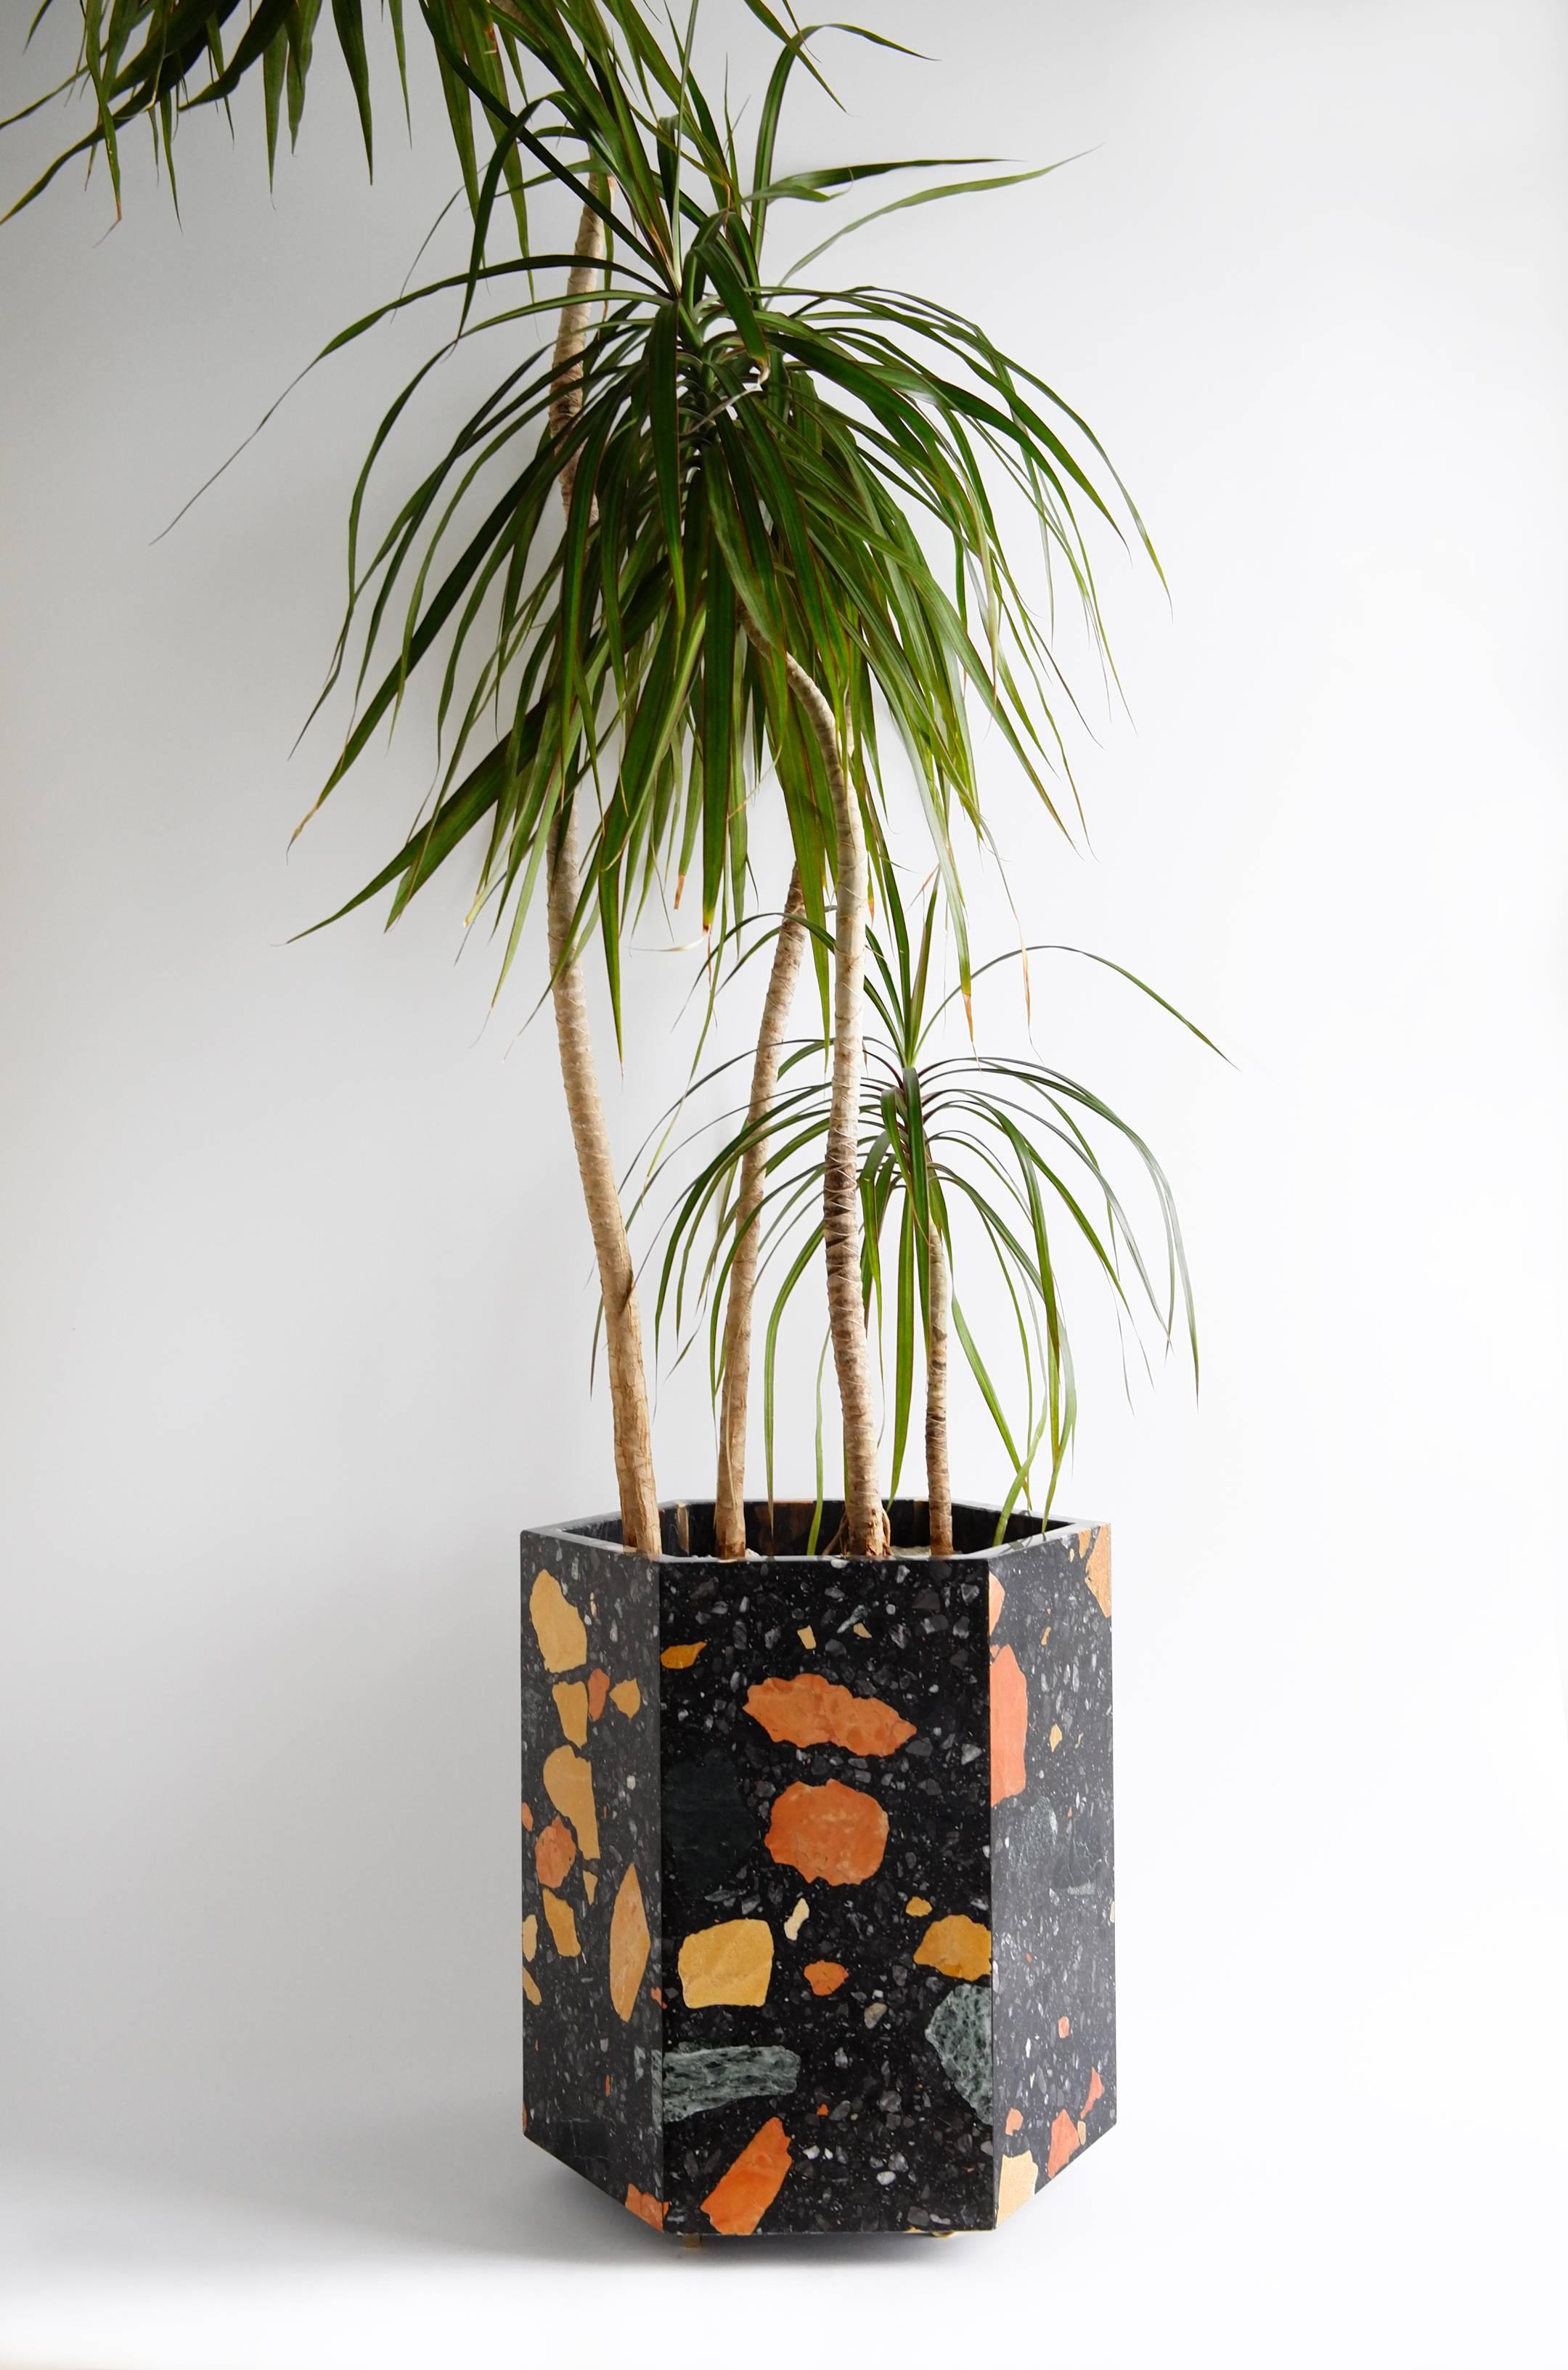 This stone planter is made of the highly coveted Marmoreal, a special aggregate terrazzo material produced by Dzek and designed by Max Lamb.  Shown in Black Marmoreal and also available in white.

Hexagonal planter is 16 tall and includes small